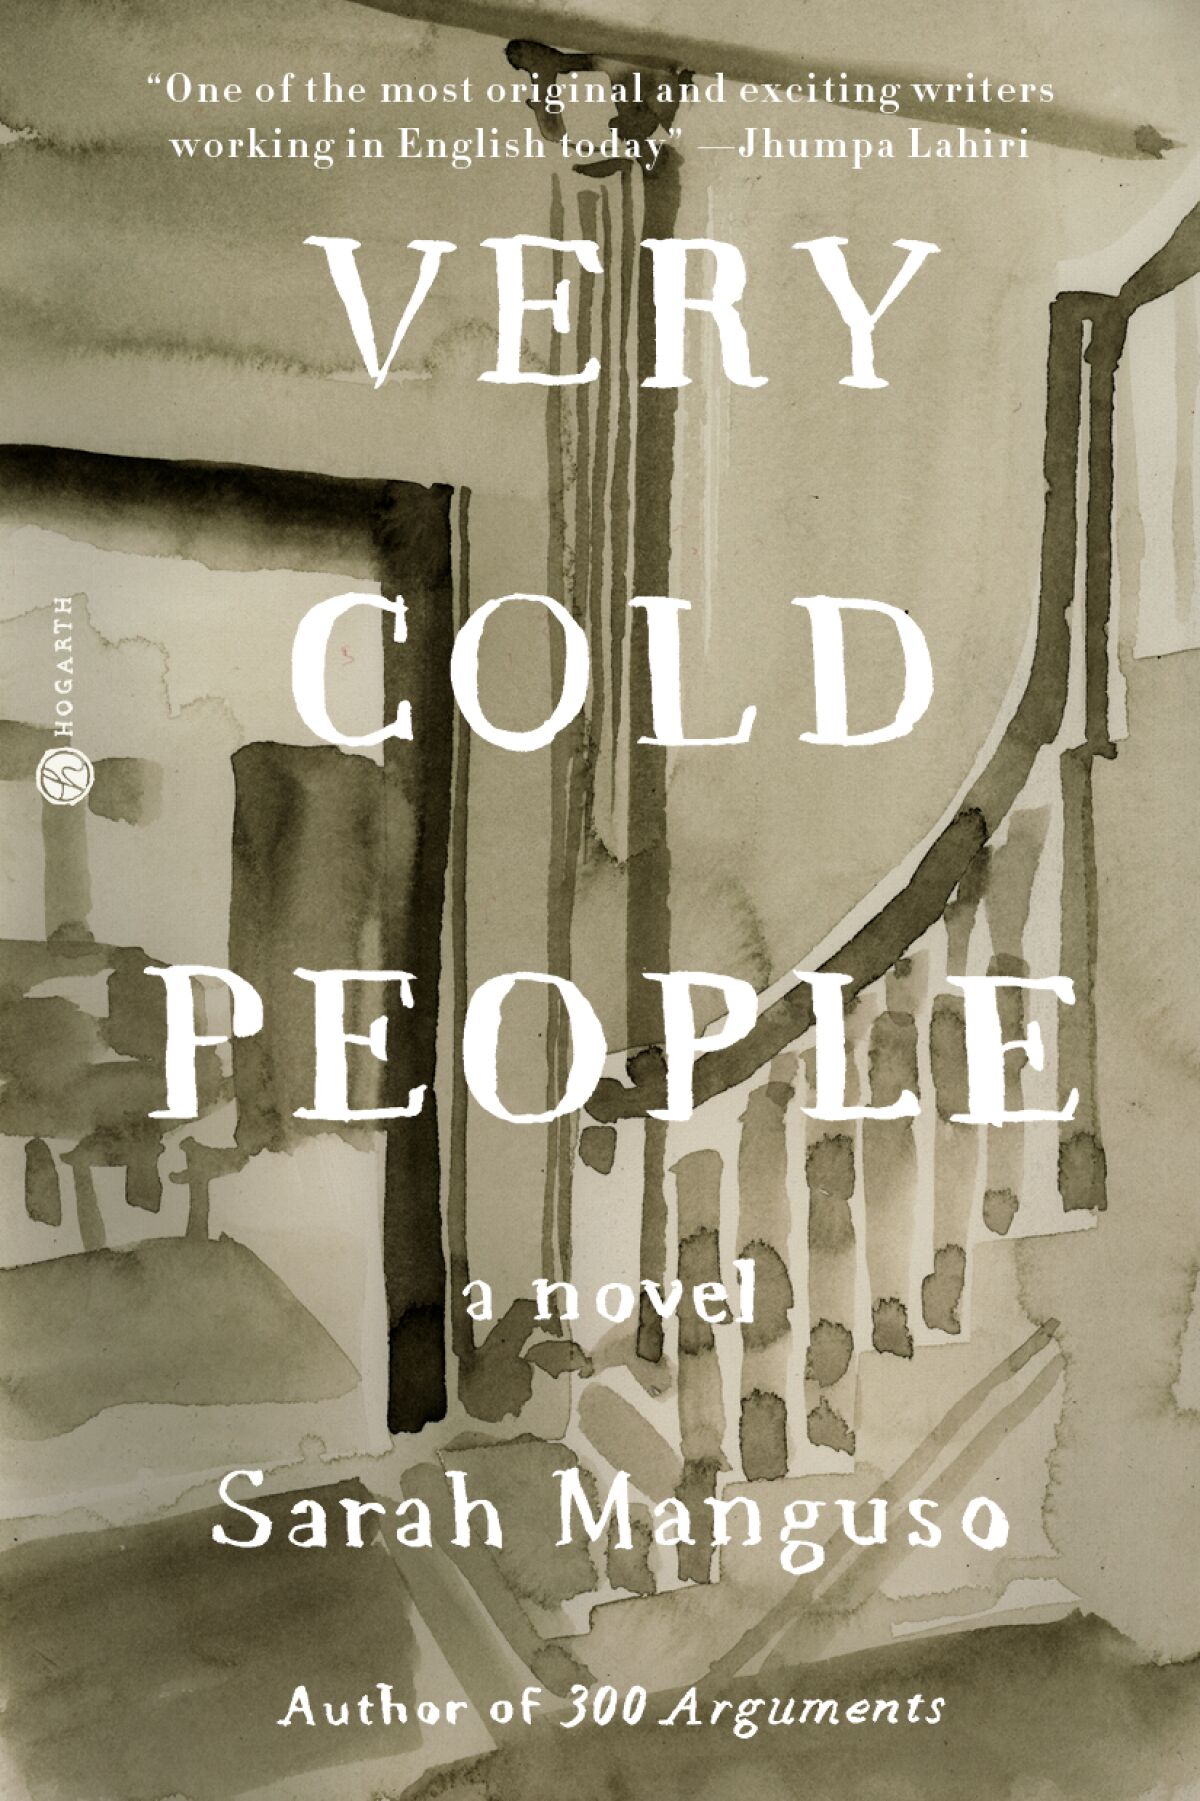 The book cover for "Very Cold People" by Sarah Manguso